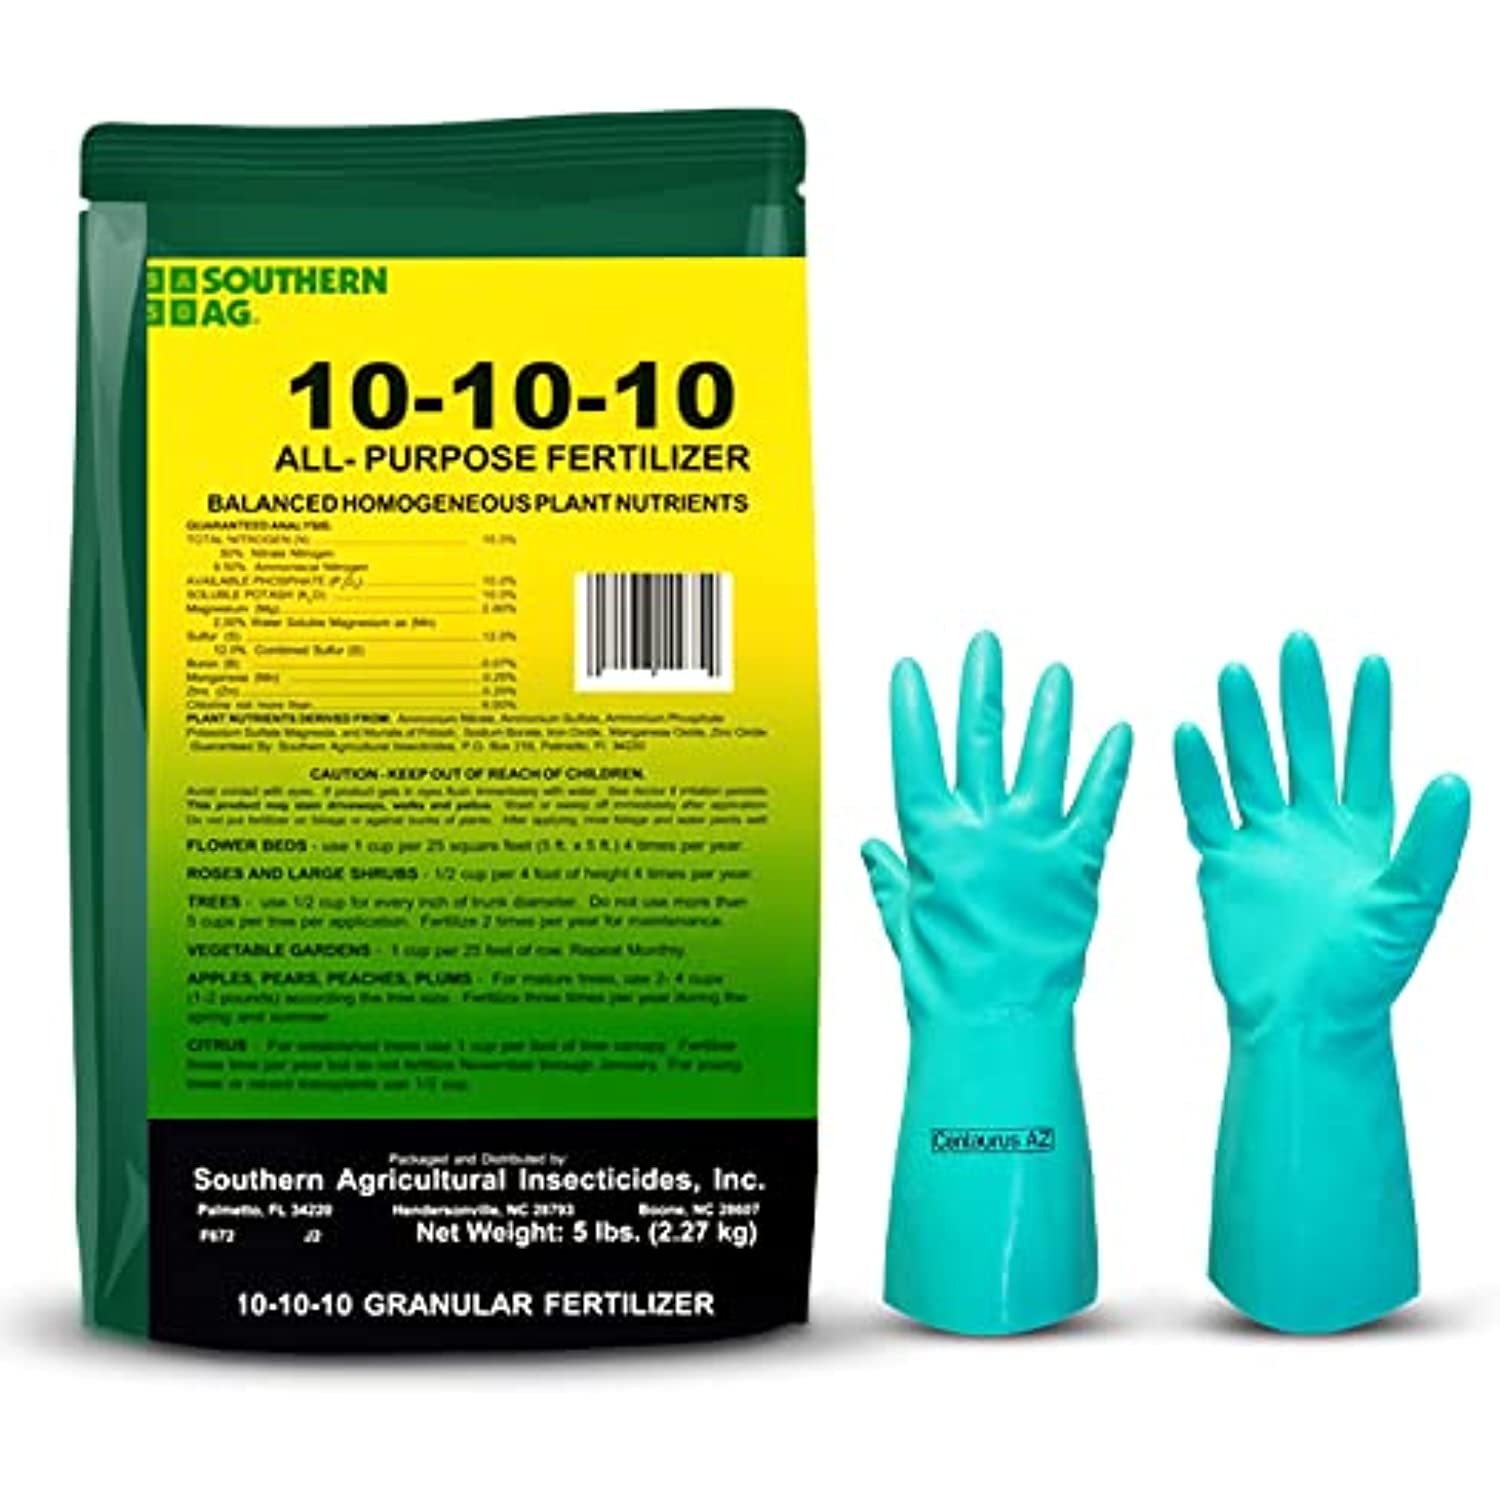 Southern Ag Fertilizer 10-10-10 - All-purpose Granular Fertilizer - organic fertilizer – Fertilizer for vegetable garden & Flowerbed Roses & Large Shrubs and Fruit Trees- Available with Premium Quality Centaurus AZ Gloves-5LB